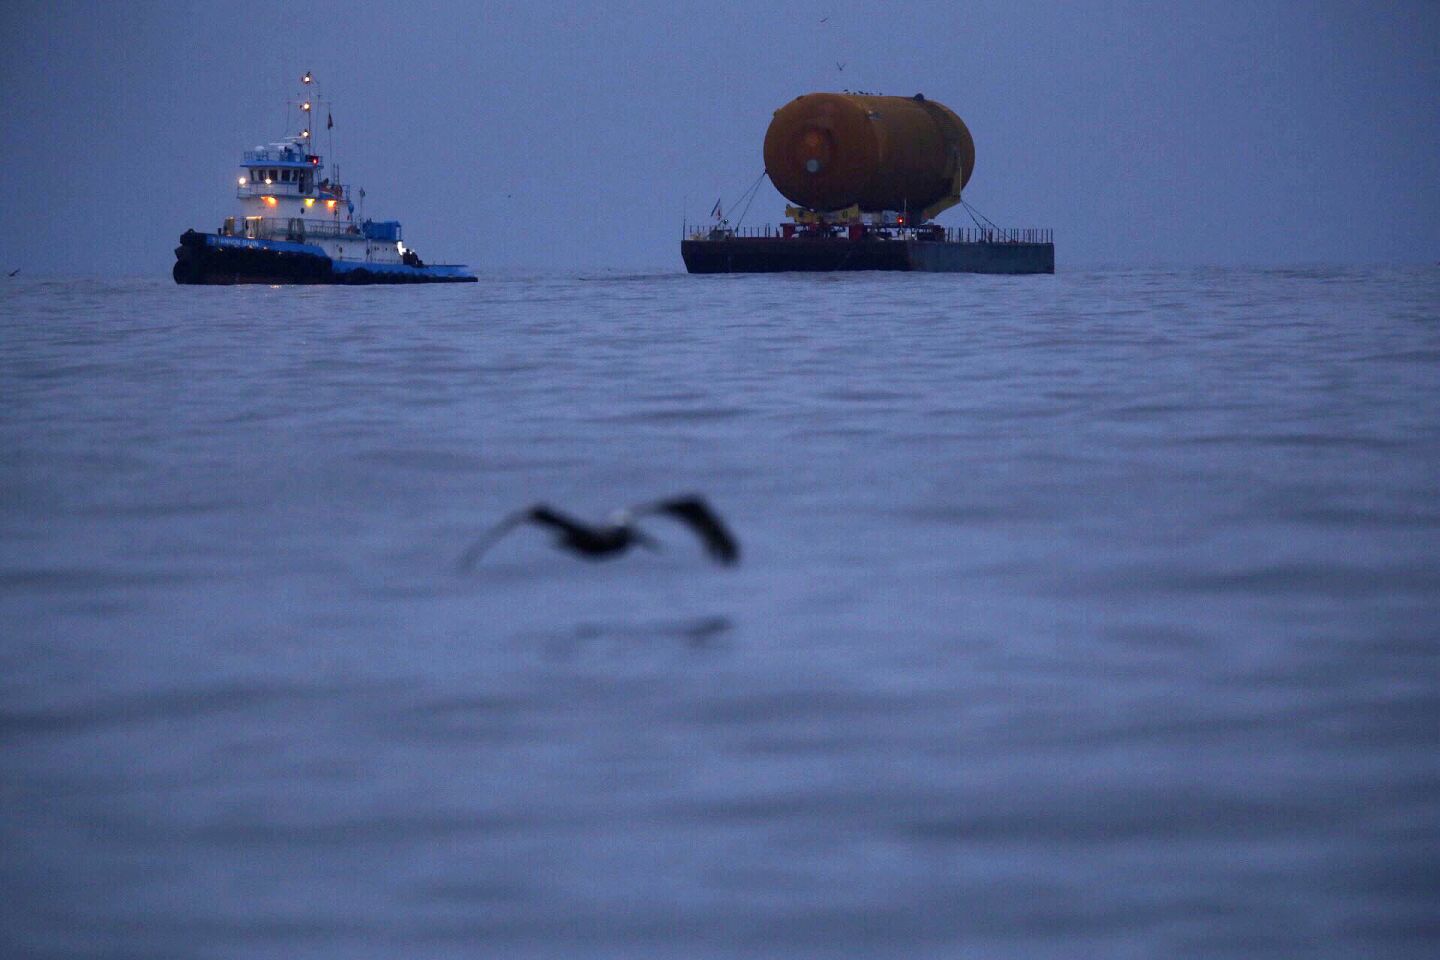 ET-94, NASA's last remaining space shuttle external tank, arrives in Marina del Rey early Wednesday morning.